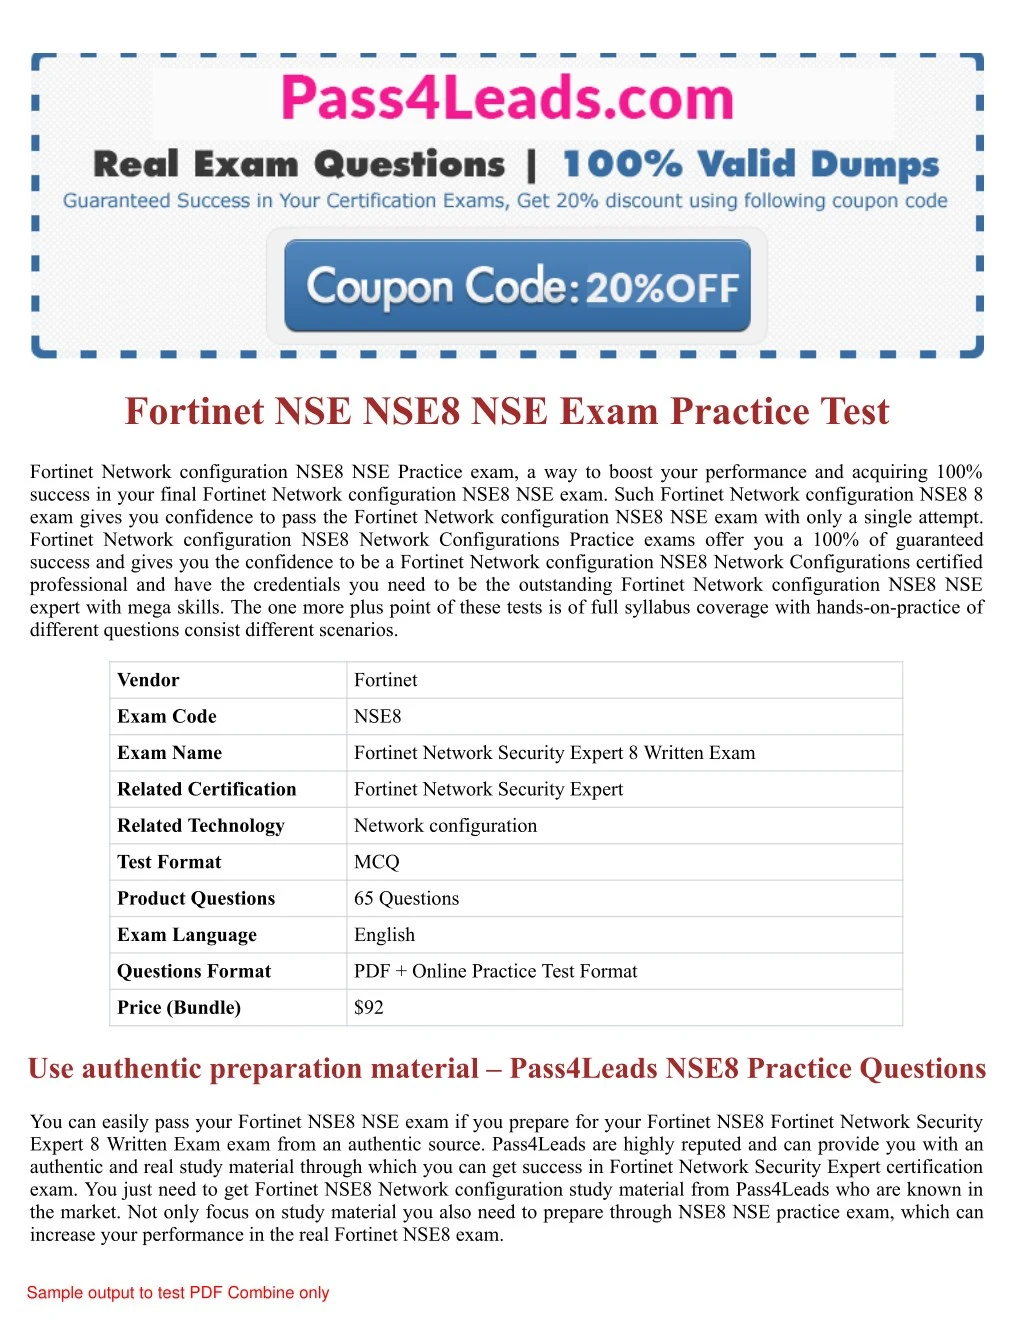 fortinet nse nse8 nse exam practice test